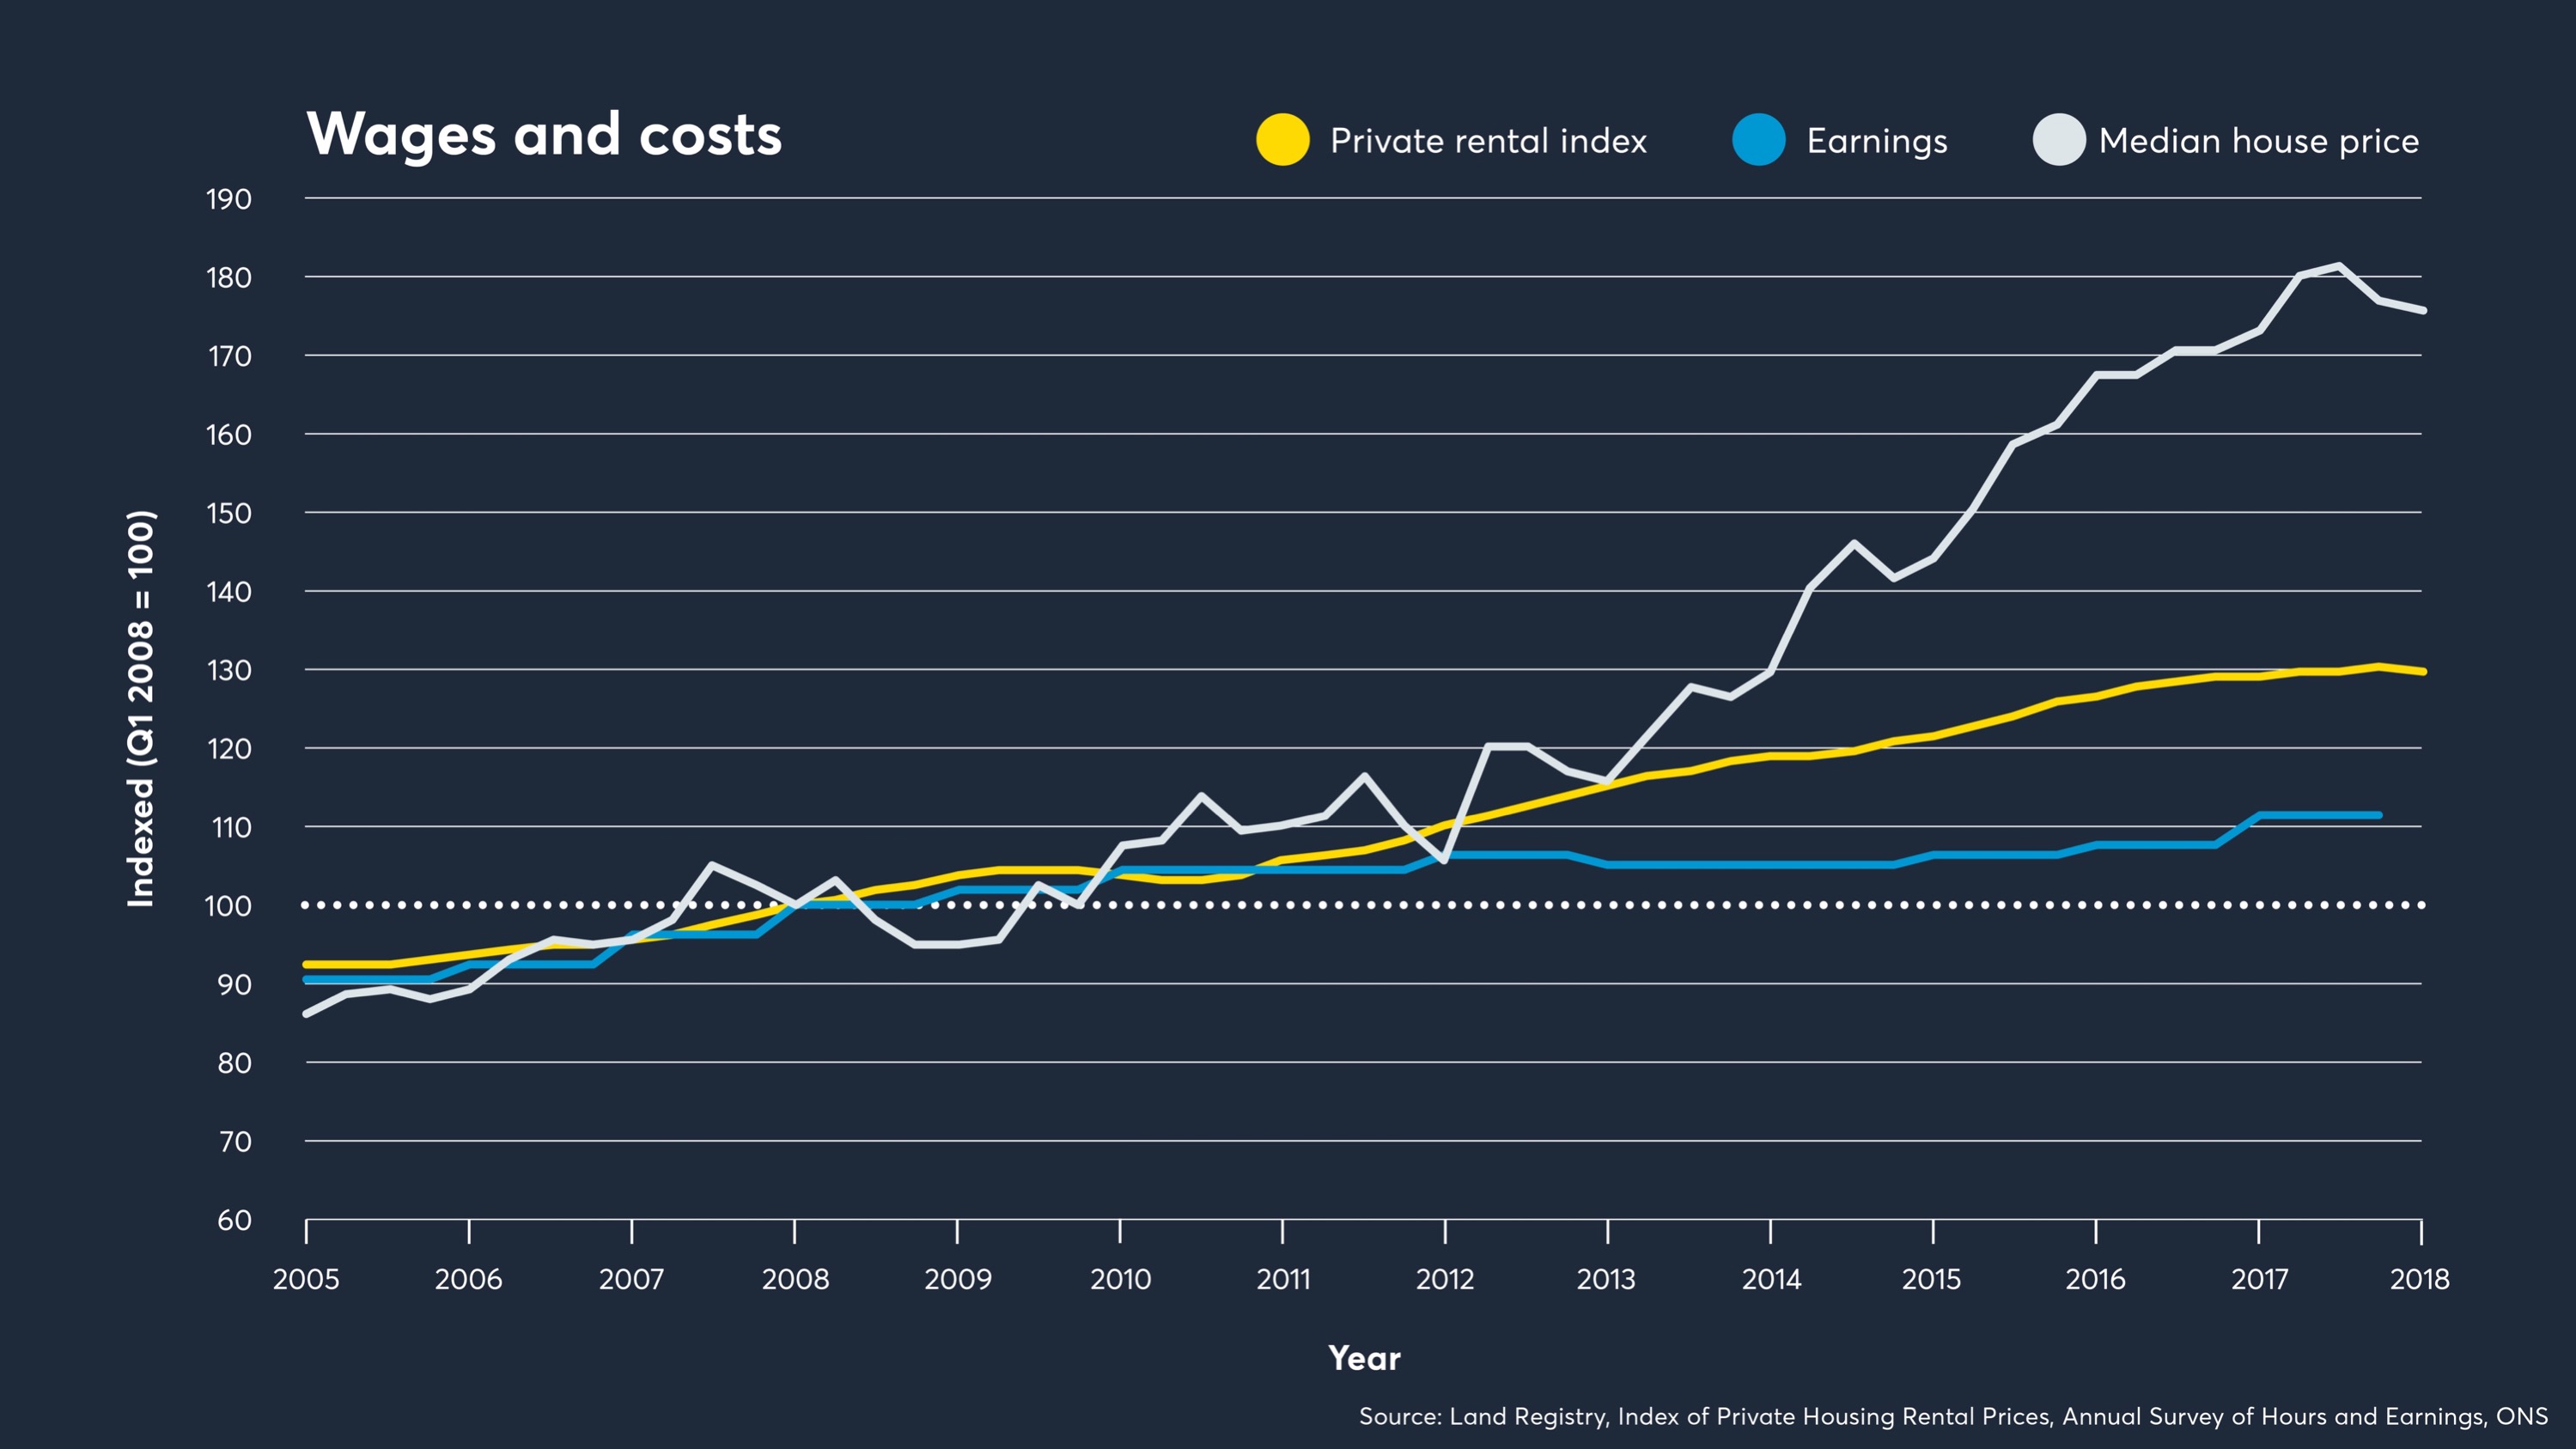 private rental index, earnings, median house price, living wage